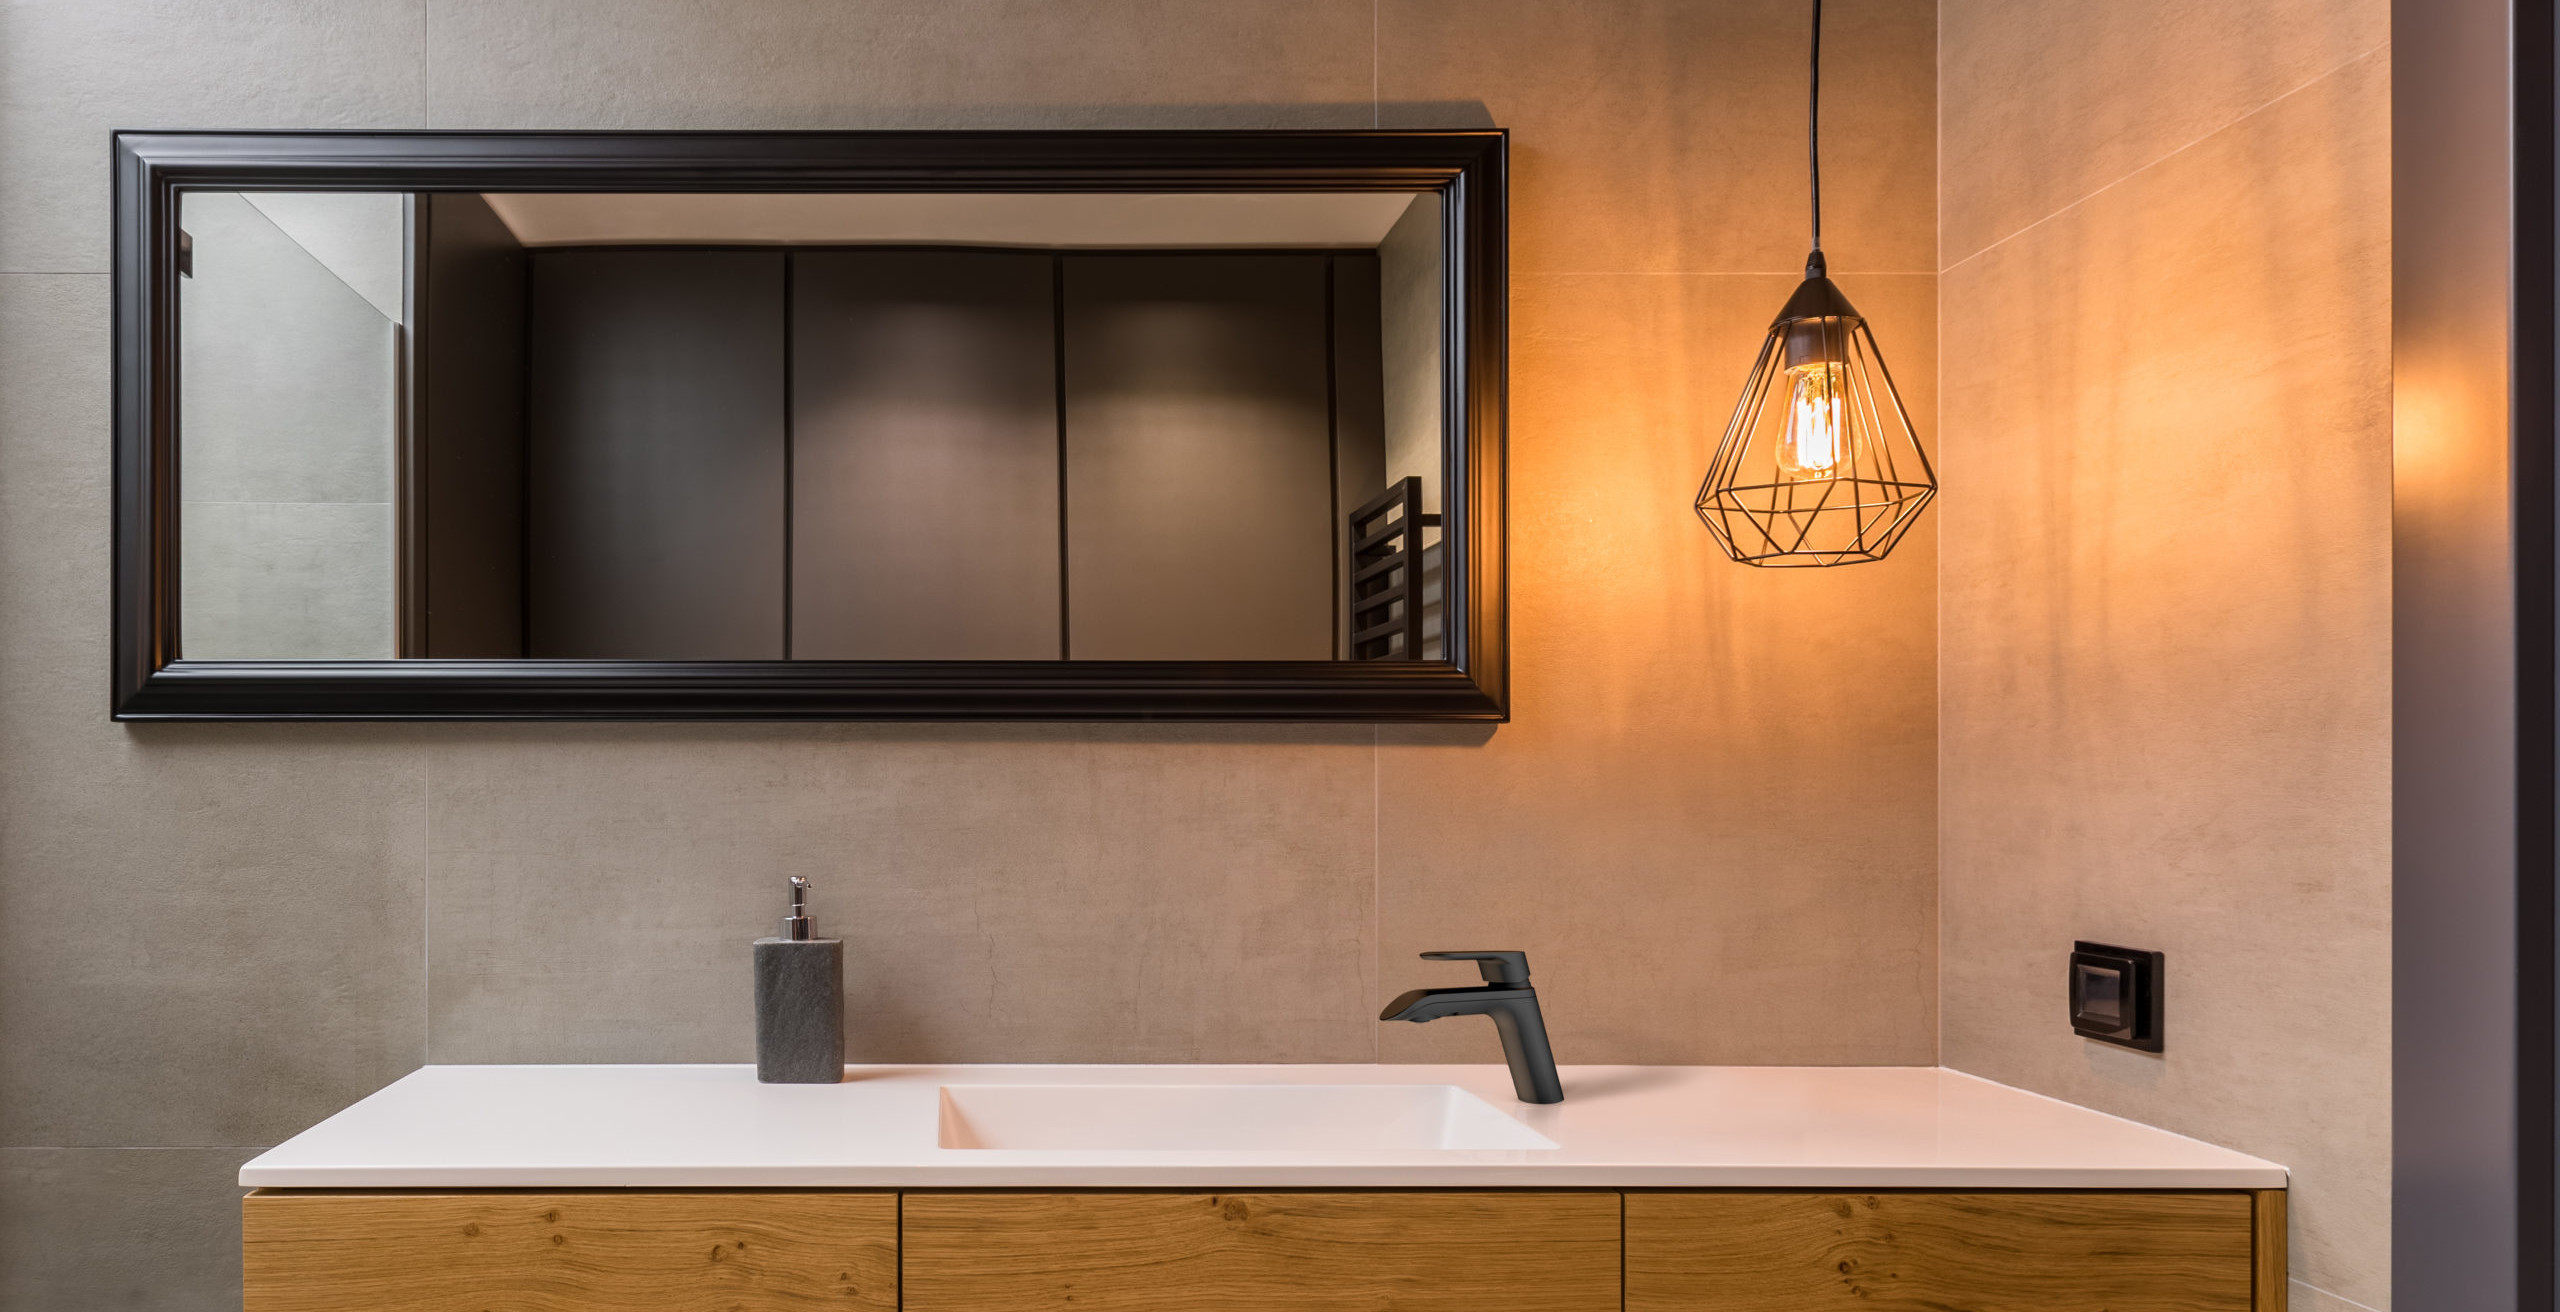 A warm colors bathroom, complemented with black details, such as black mirror frame and matte black single-handed bathroom faucet.